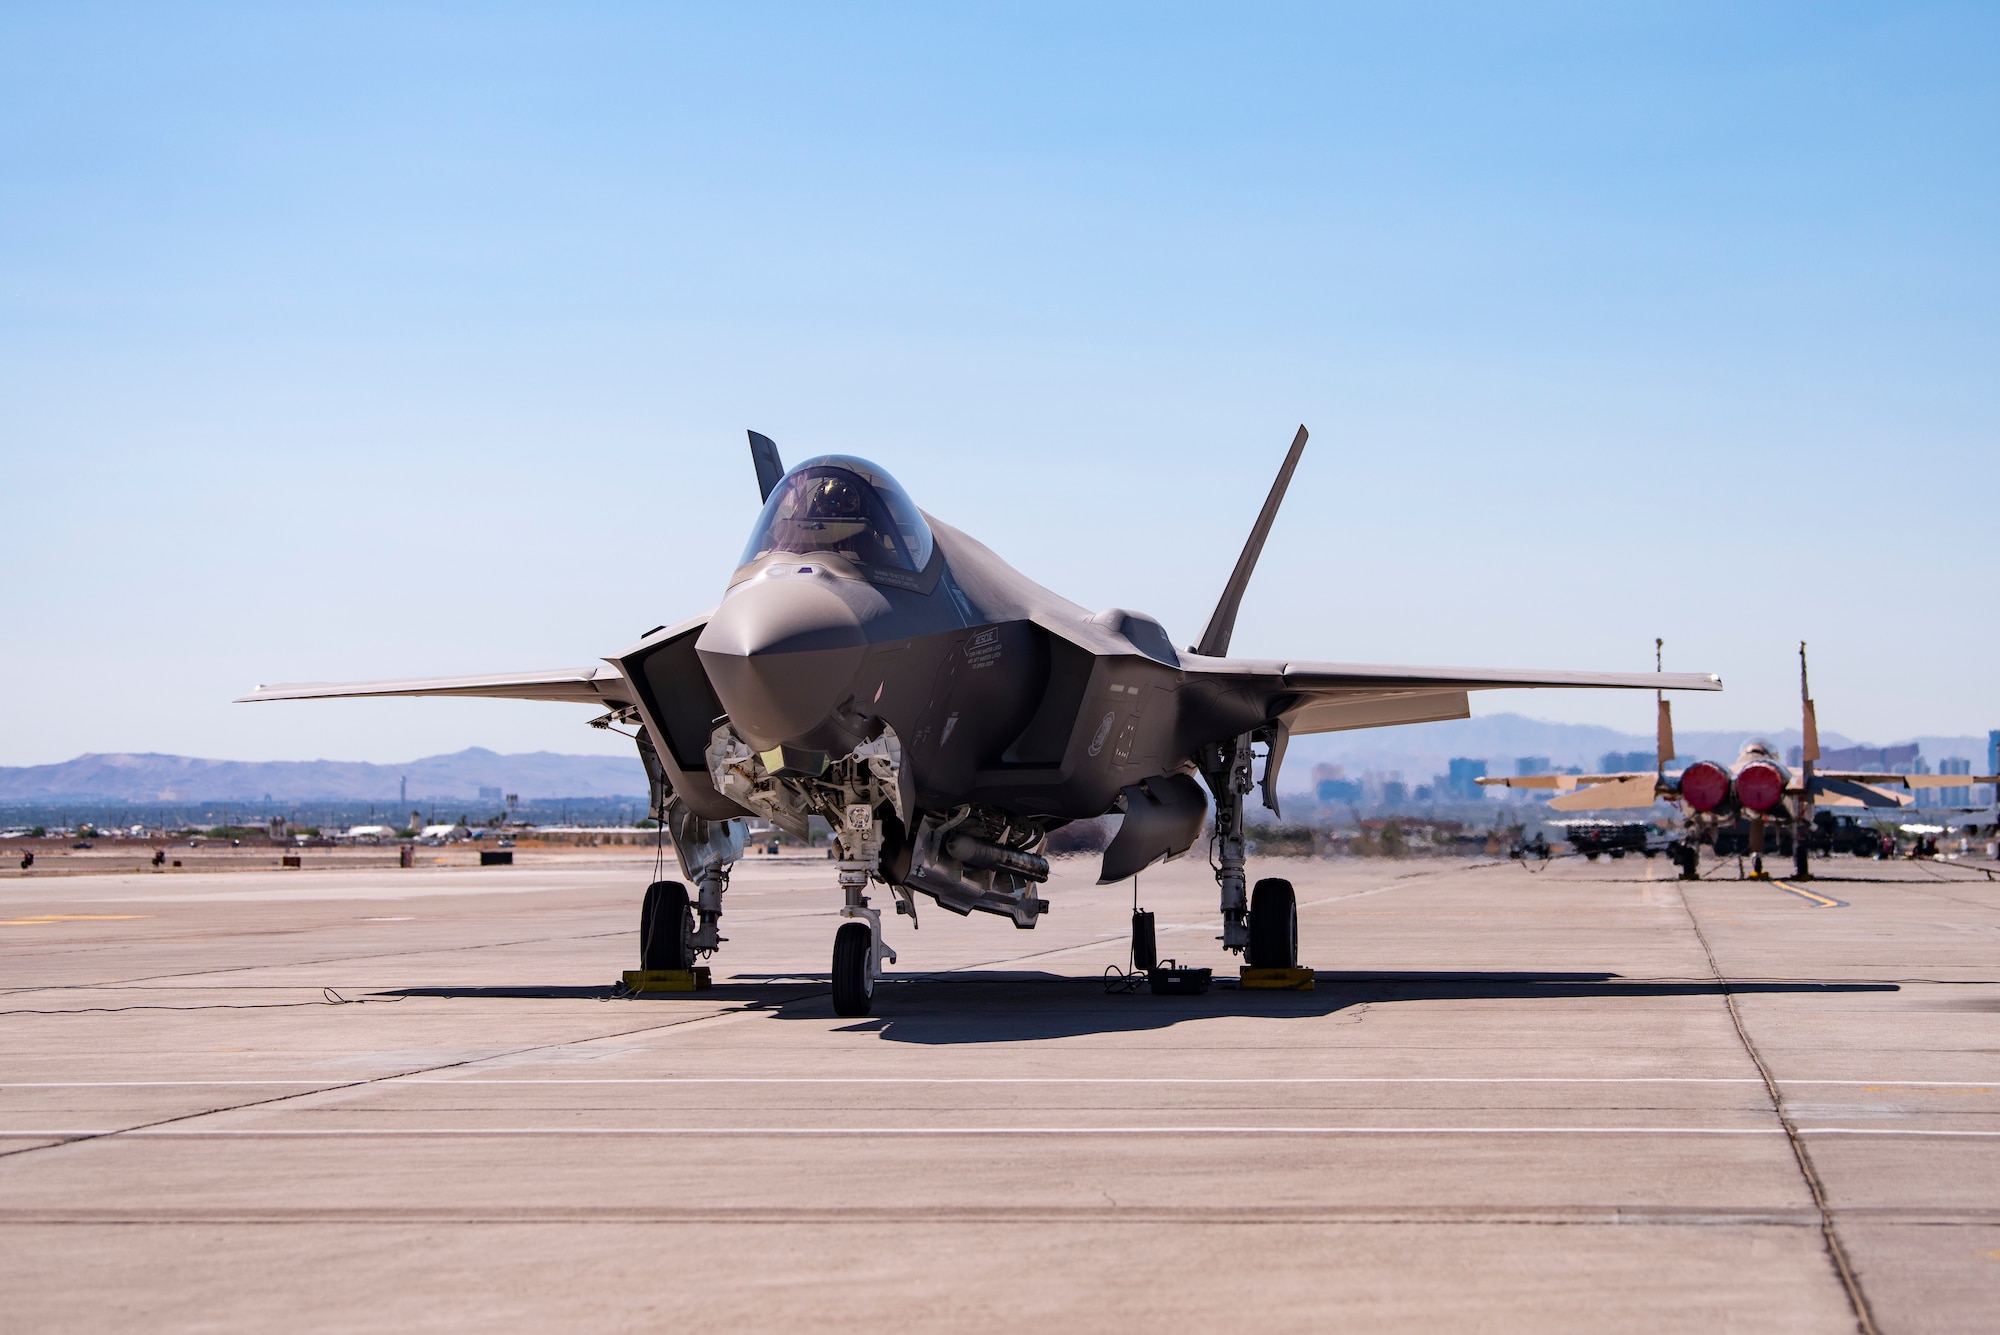 An F-35A Lighting II from Hill Air Force Base, Utah, carrying a B61-12 Joint Test Assembly sits on the flight line at Nellis Air Force Base, Nevada, Sept. 21, 2021. Two F-35A Lightning II aircraft released B61-12 Joint Test Assemblies during the first Full Weapon System Demonstration, completing the final flight test exercise of the nuclear design certification process. (U.S. Air Force photo by Airman 1st Class Zachary Rufus)